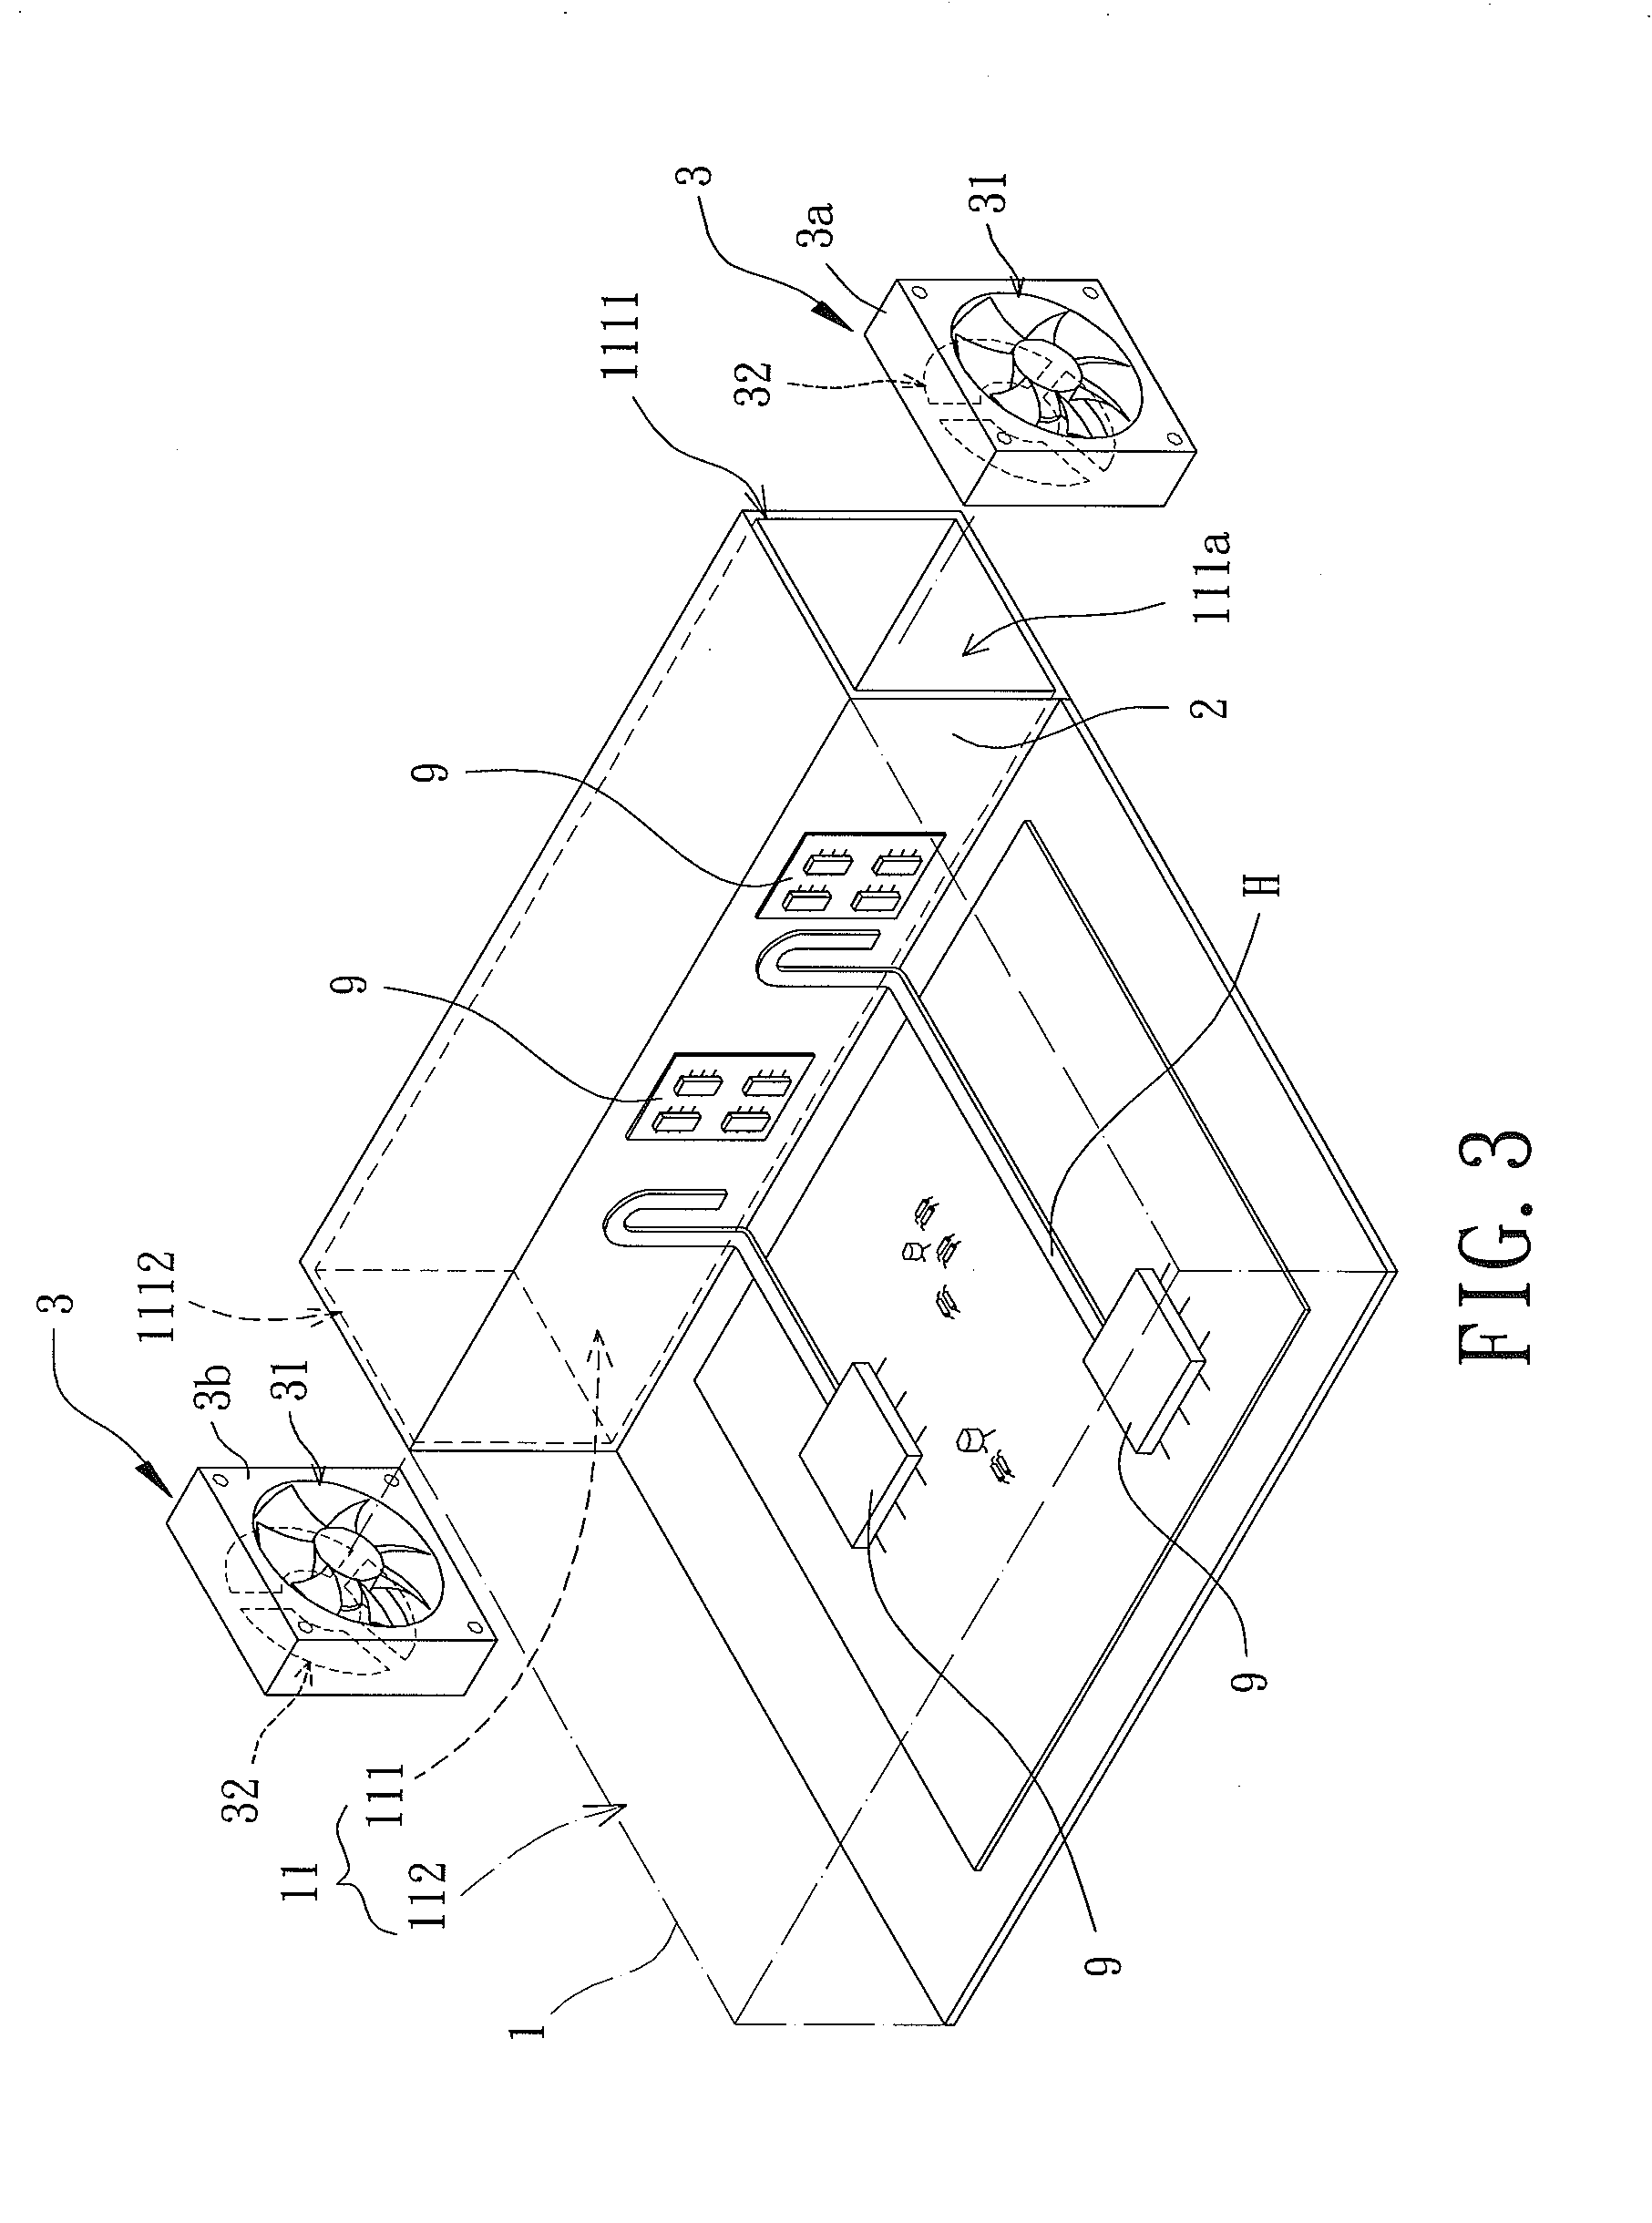 Electronic Product Including a Heat Dissipating Device